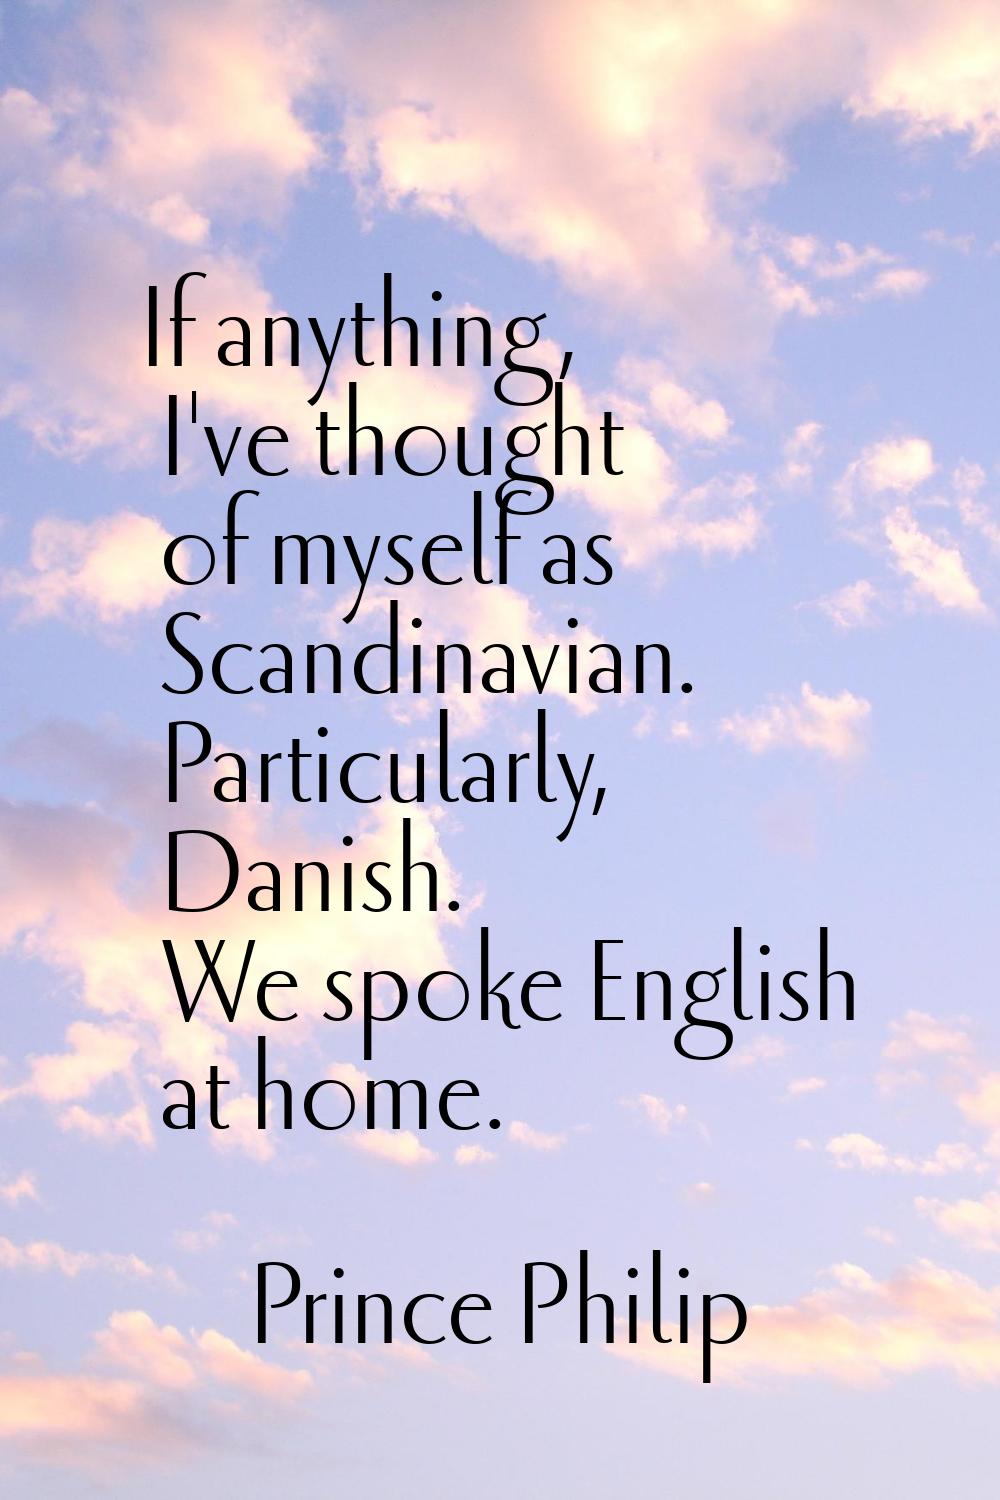 If anything, I've thought of myself as Scandinavian. Particularly, Danish. We spoke English at home